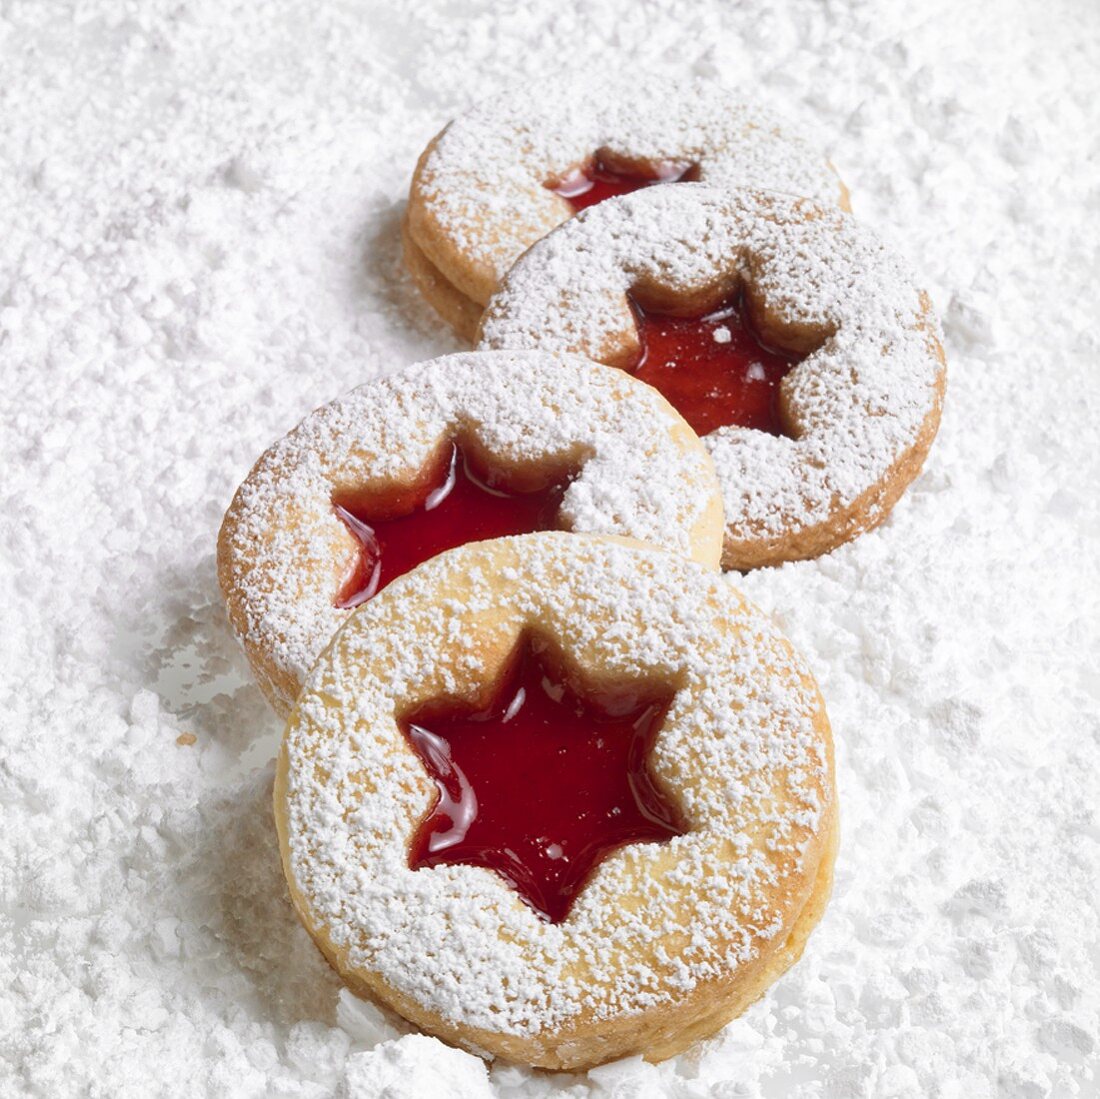 Four Linzer biscuits on icing sugar